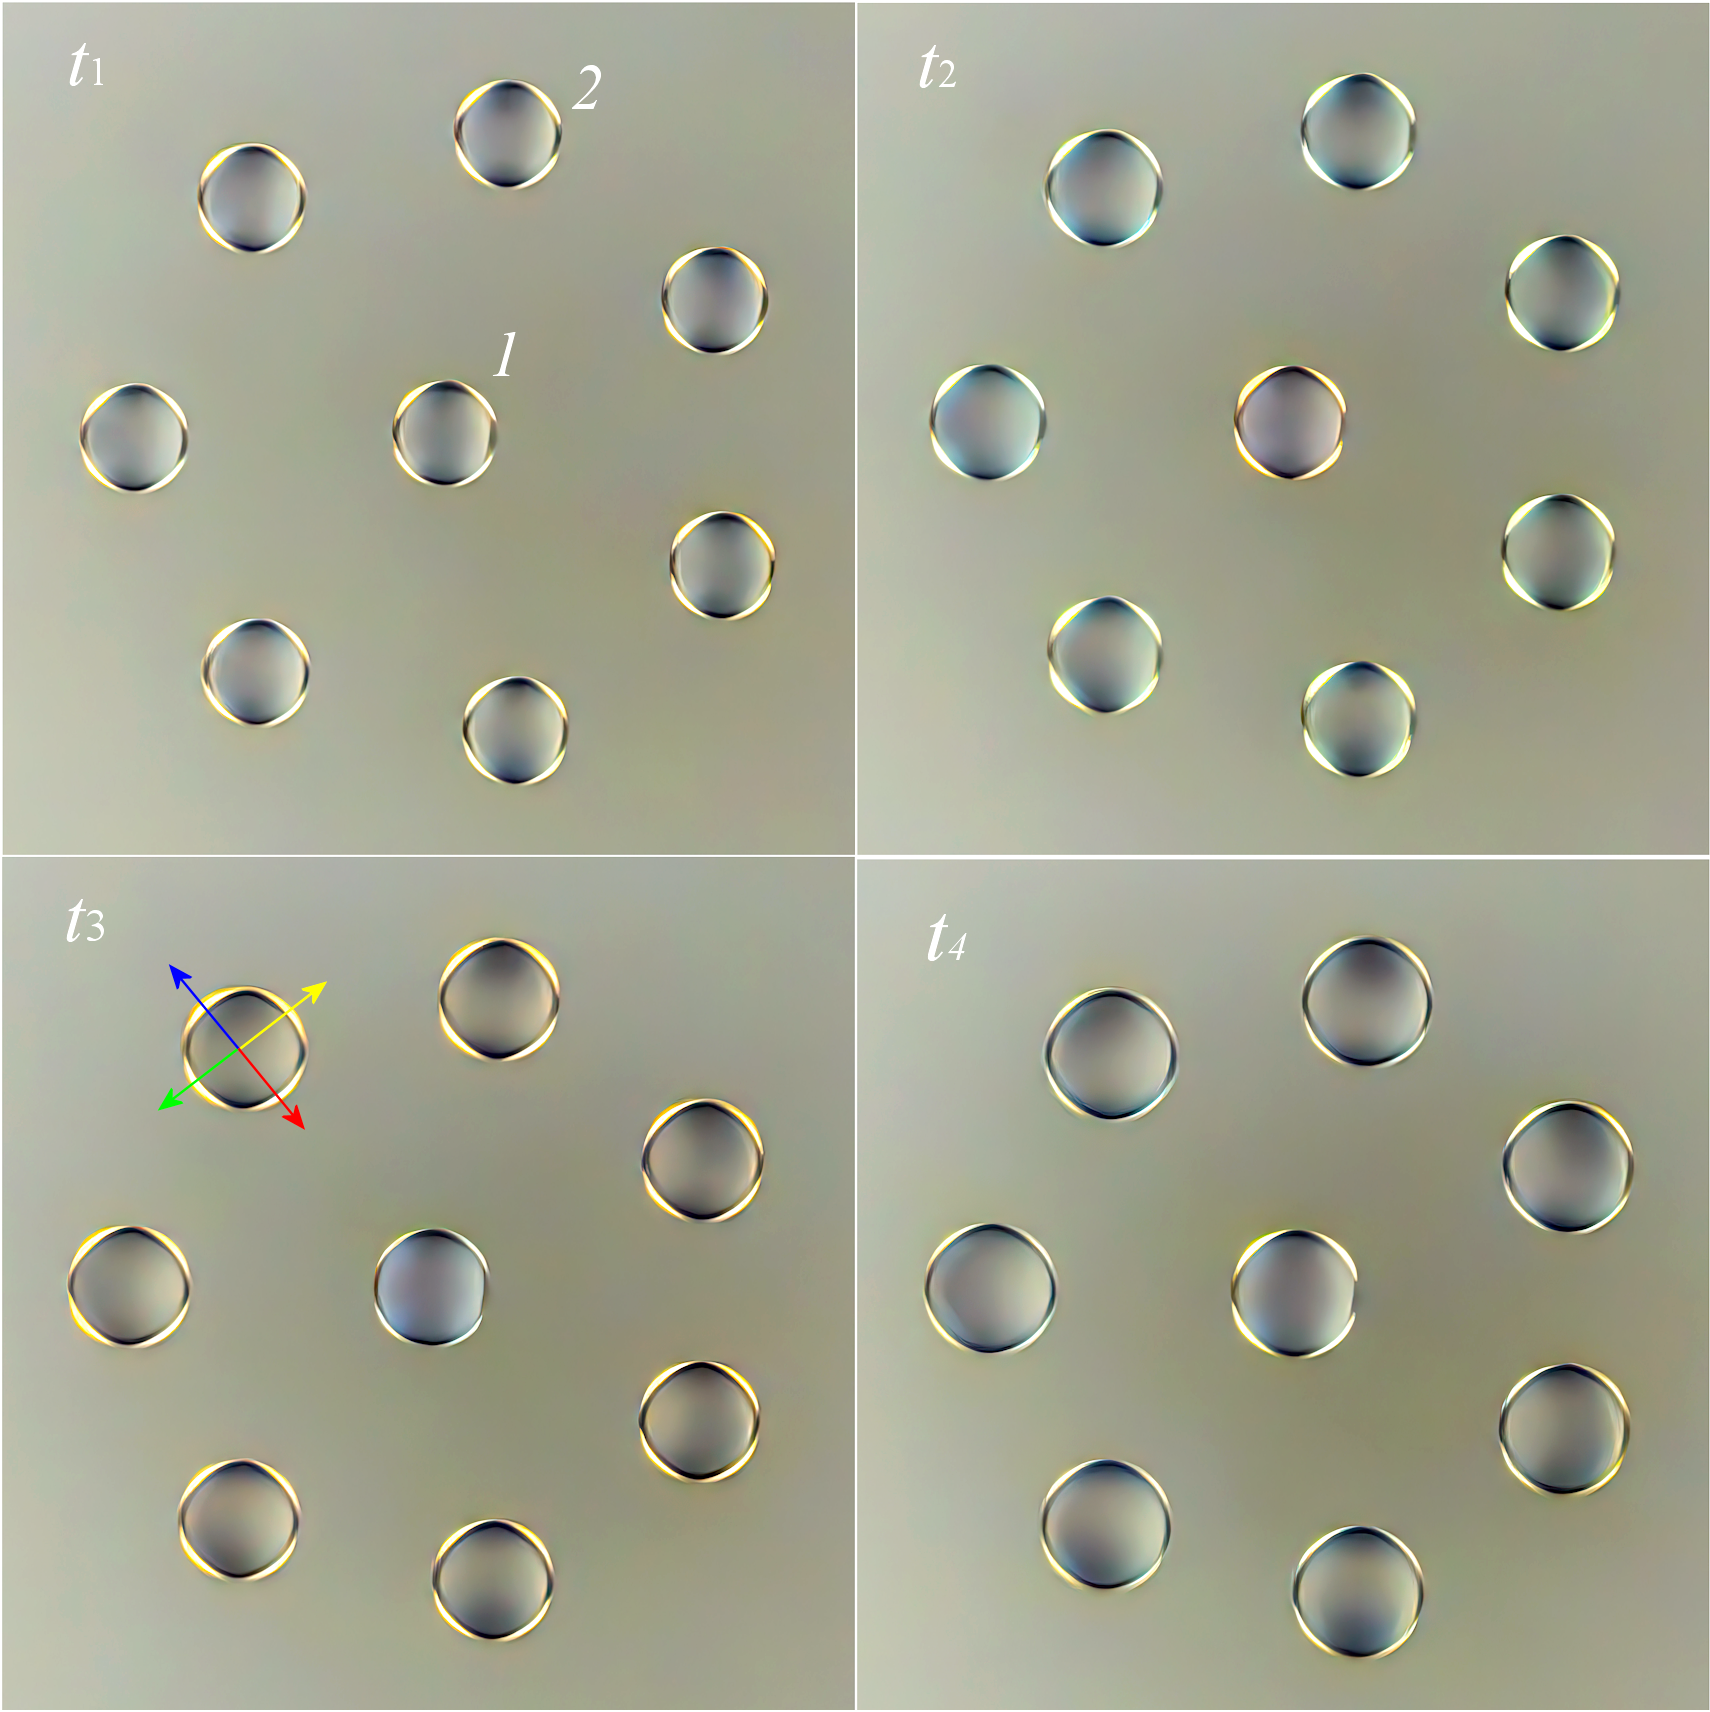 Changes in the color of the halo around the droplets as the droplets grow and approach the water surface: (c) cluster images at characteristic times, shown in panels (a) and (b) [the scale of the four images is the same, the lack of a scale bar is compensated for by the data in panel (b)]